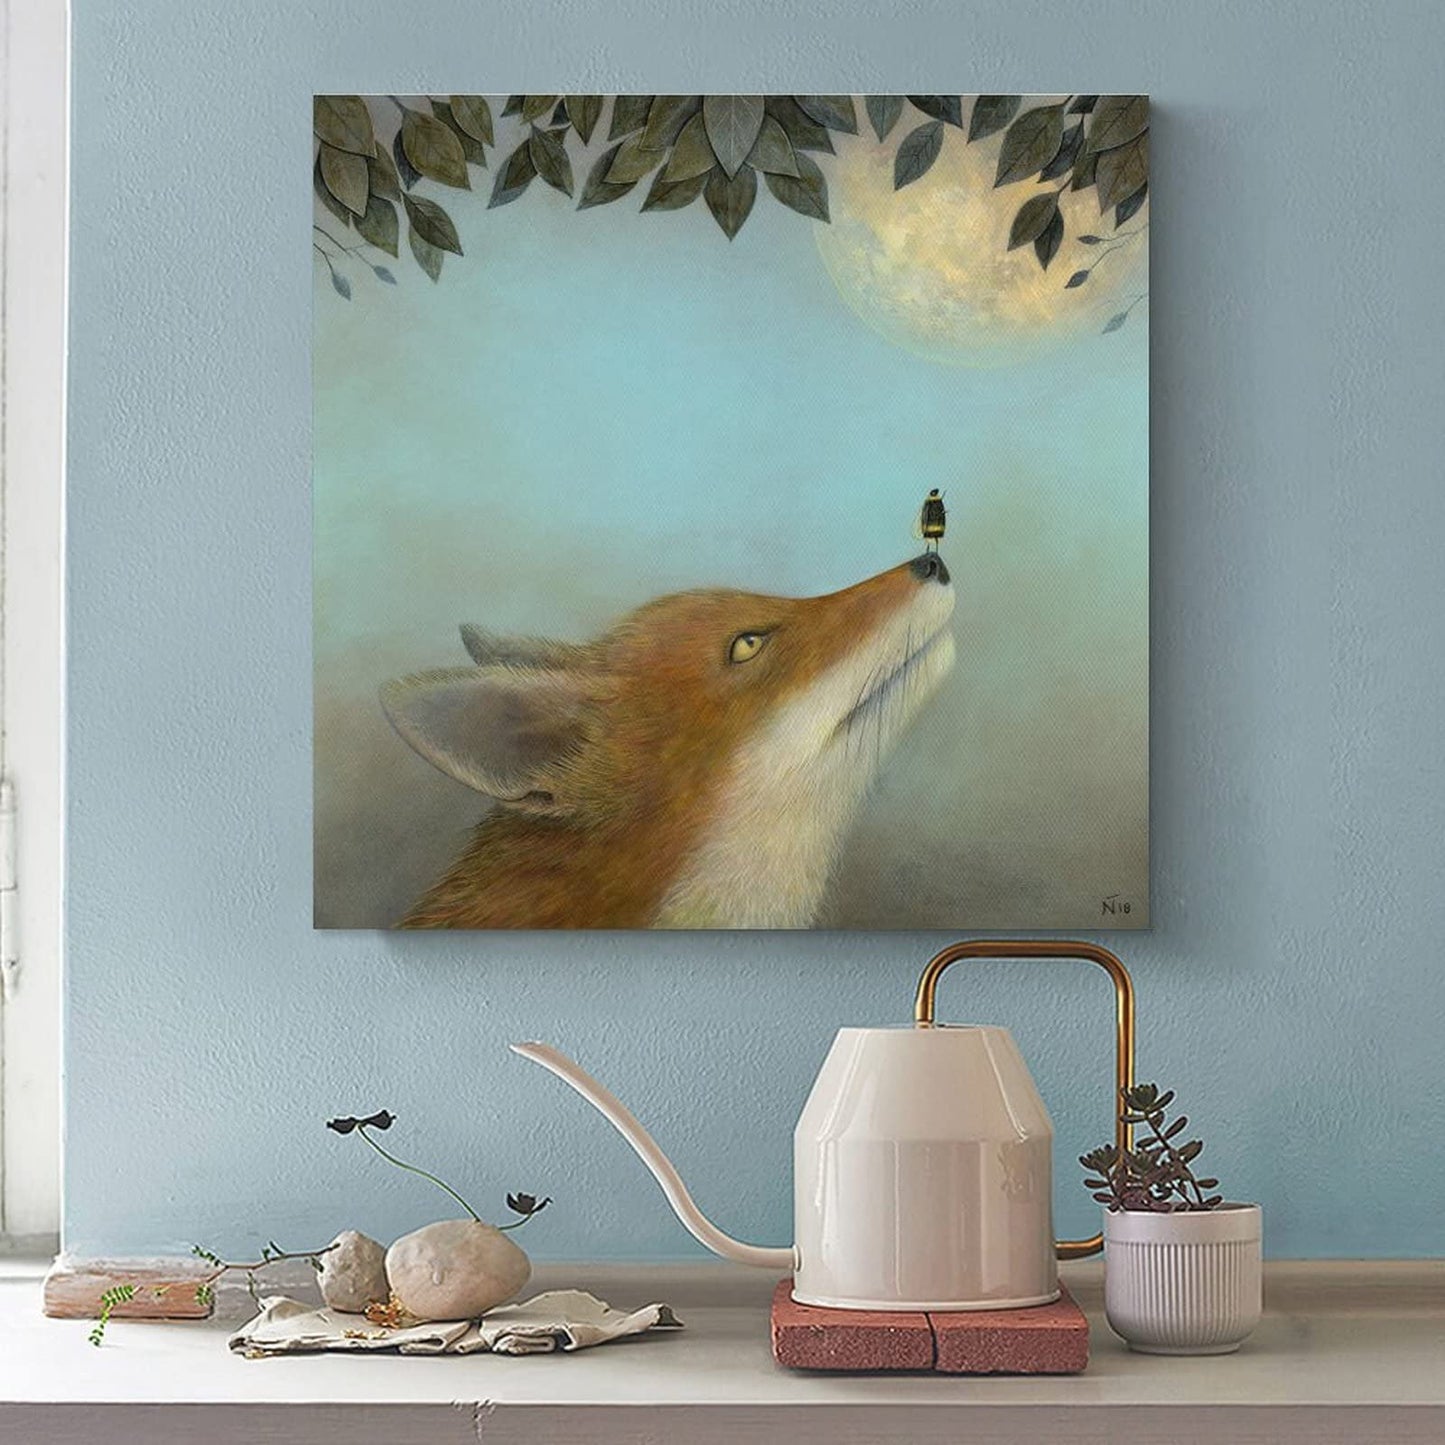 Wall Art Woodland Nursery Animals Fox Bees Nordic Posters And Printed Wall Paintings Canvas Painting Posters And Prints Wall Art Pictures for Living Room Bedroom Decor 12x12inch(30x30cm) Unframe-styl